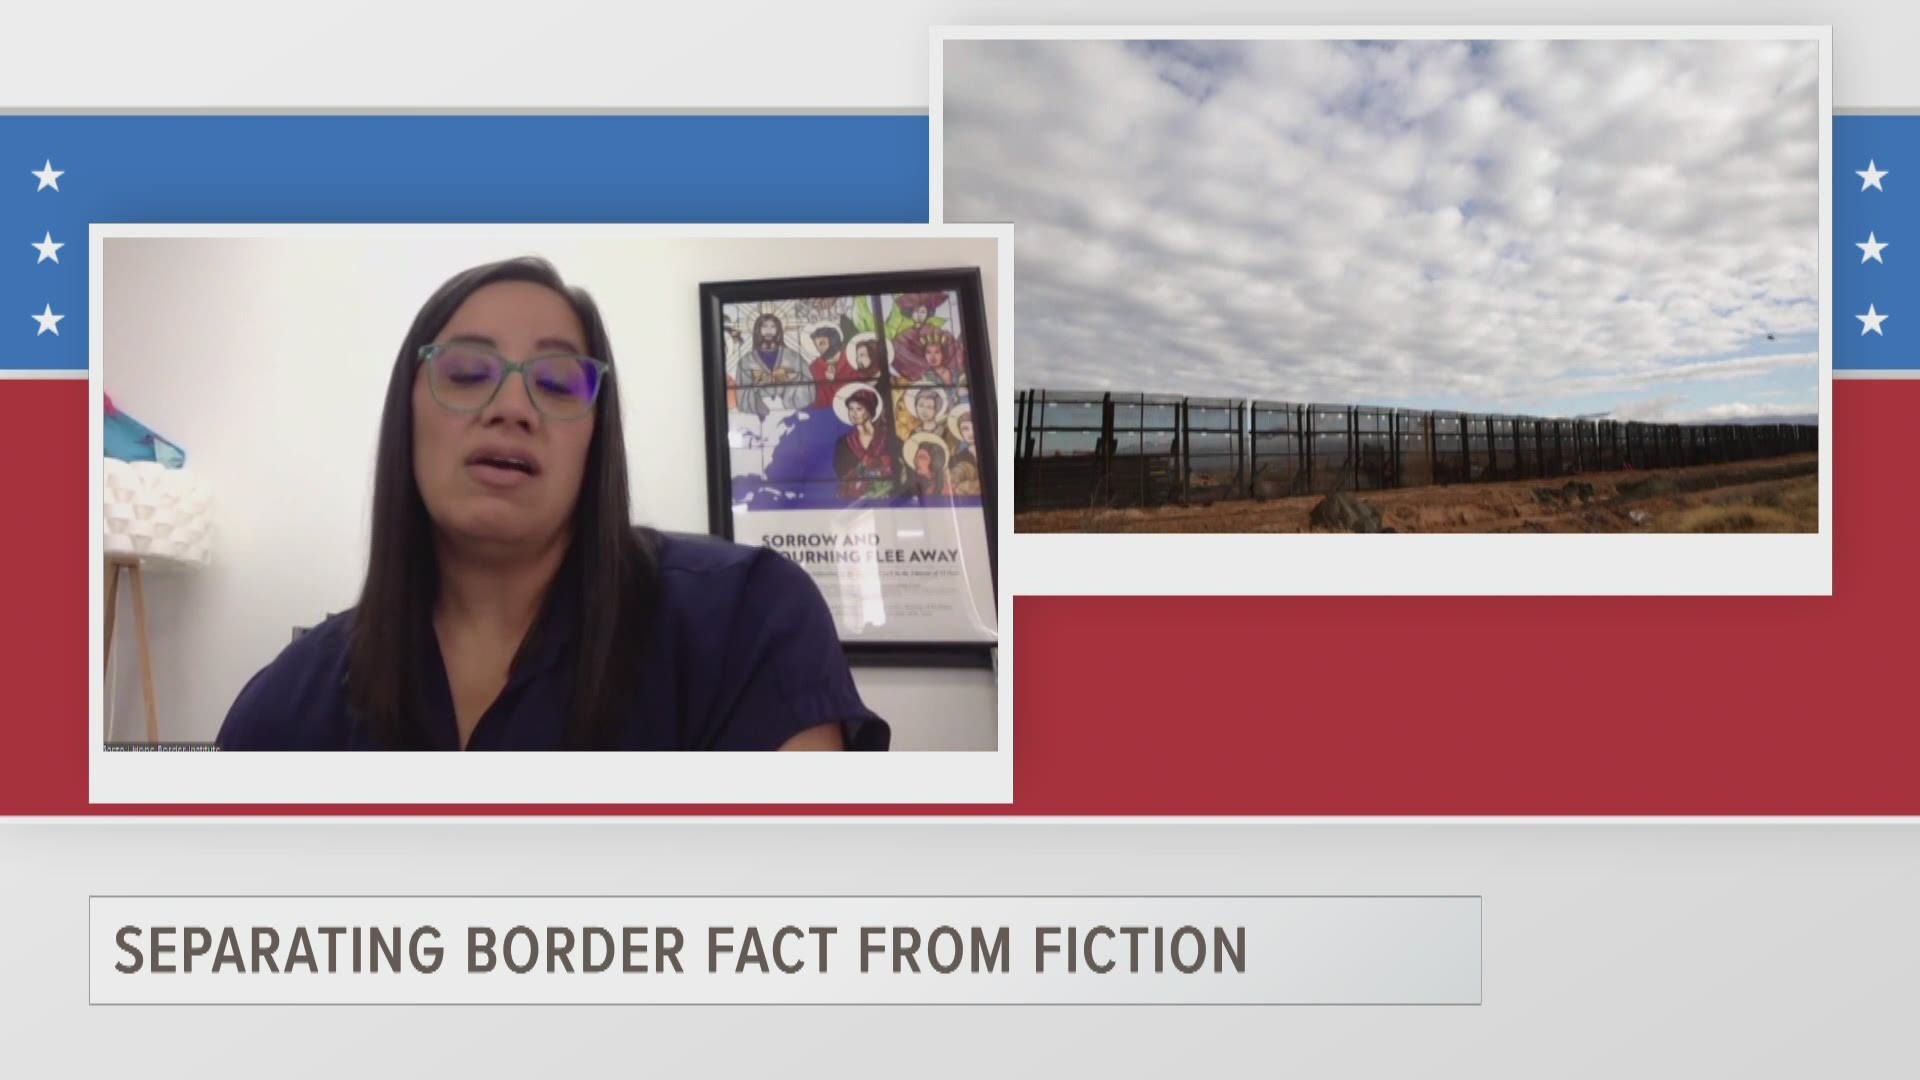 Marisa Limon Garza, deputy director of the HOPE Border Institute, discusses what's happening at the border in light of recent visits from politicians